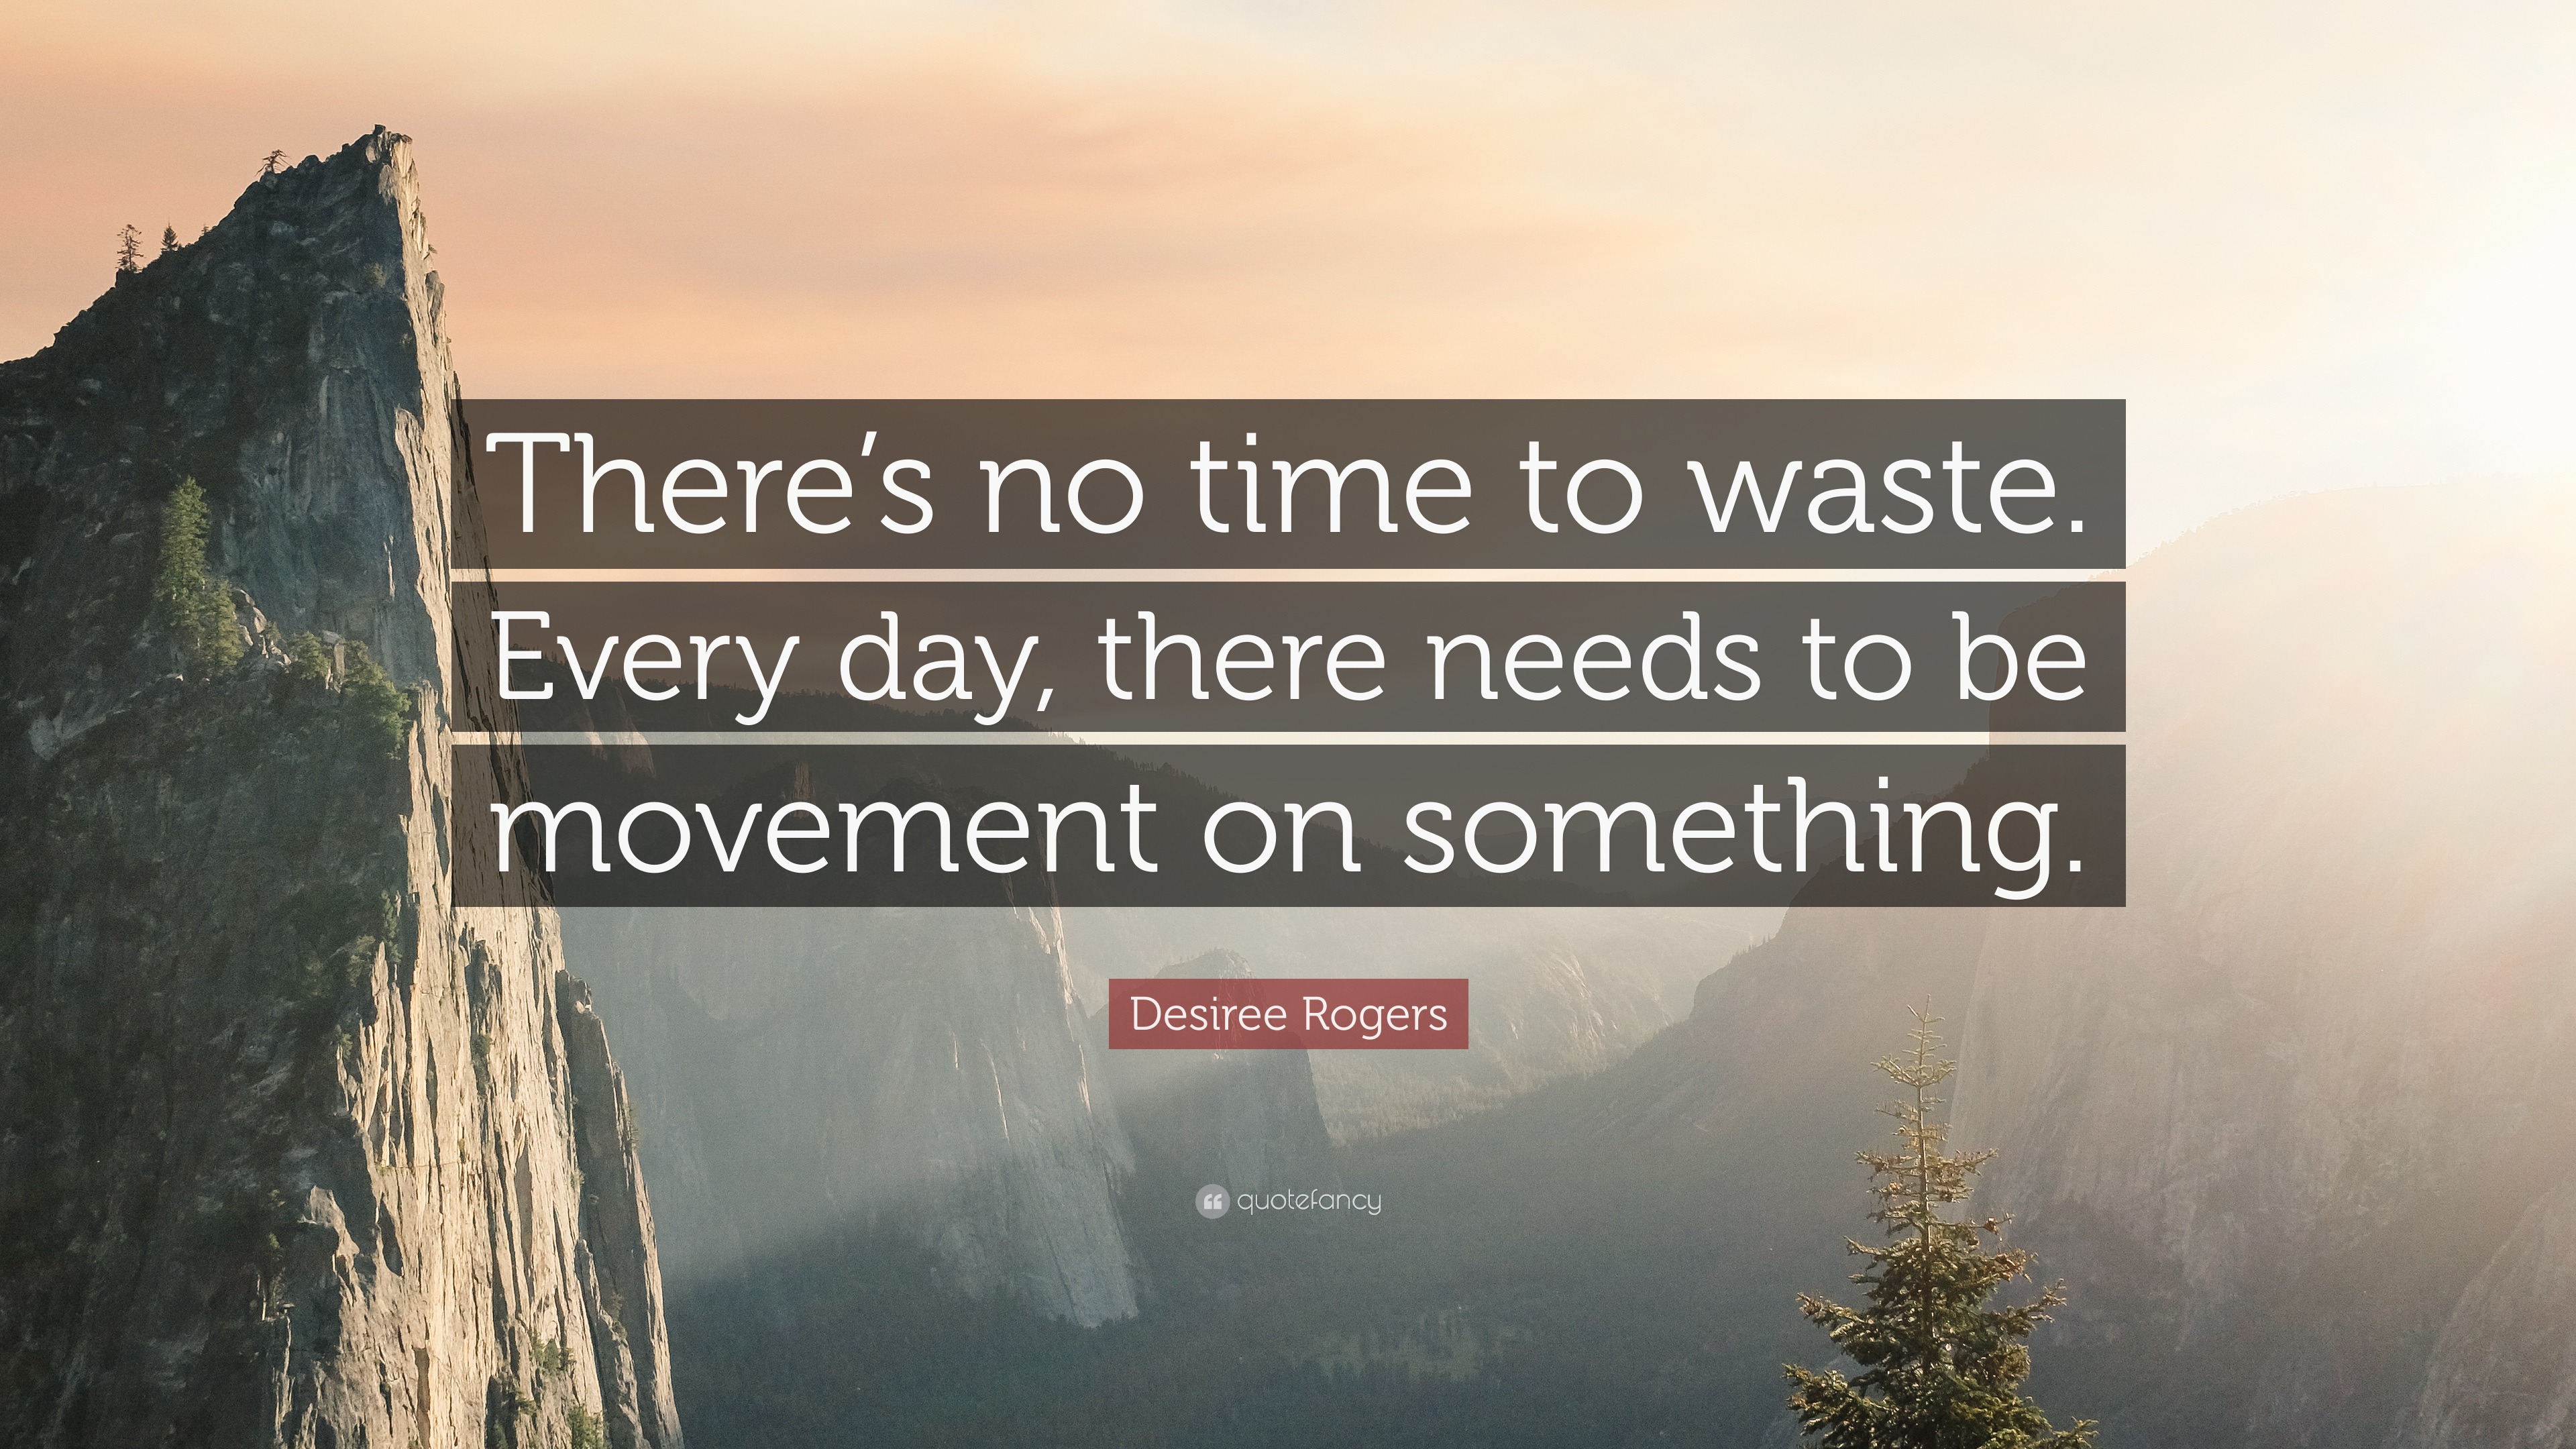 Desiree Rogers Quote “There’s no time to waste. Every day